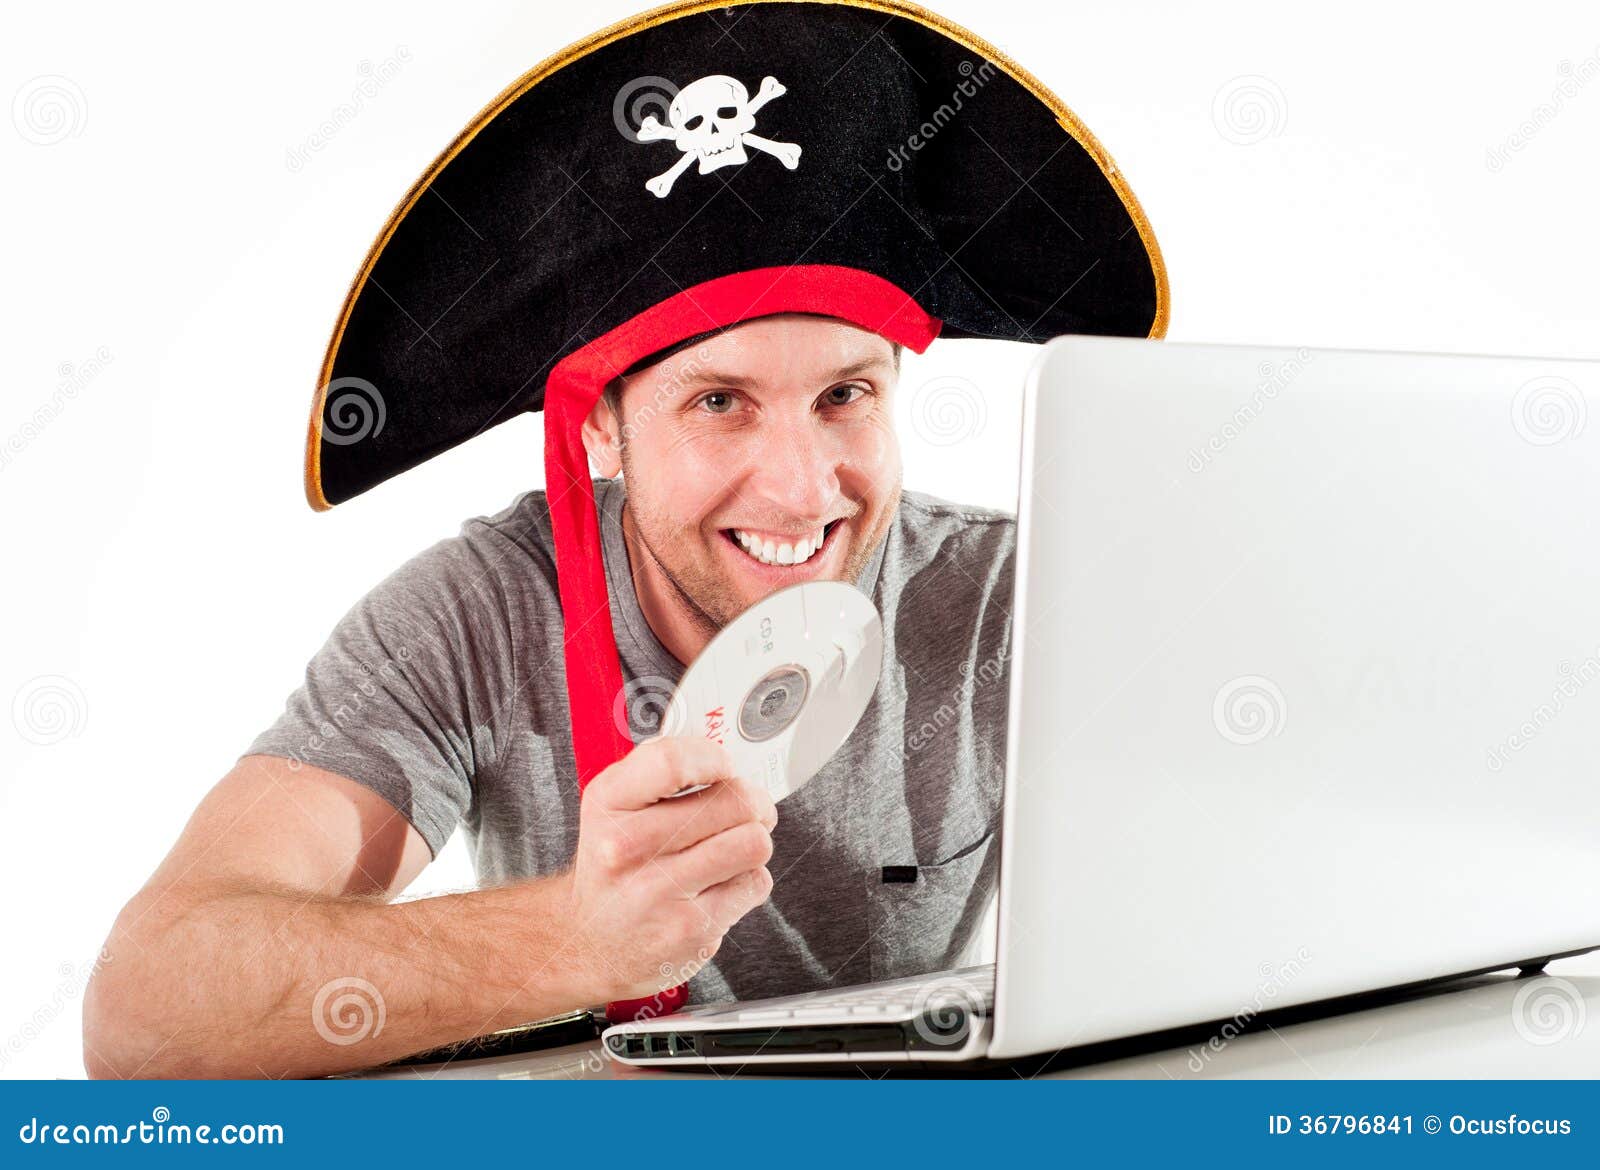 Man In Pirate Hat Downloading Music On A Laptop Stock Image Image Of Piracy Hijack 36796841